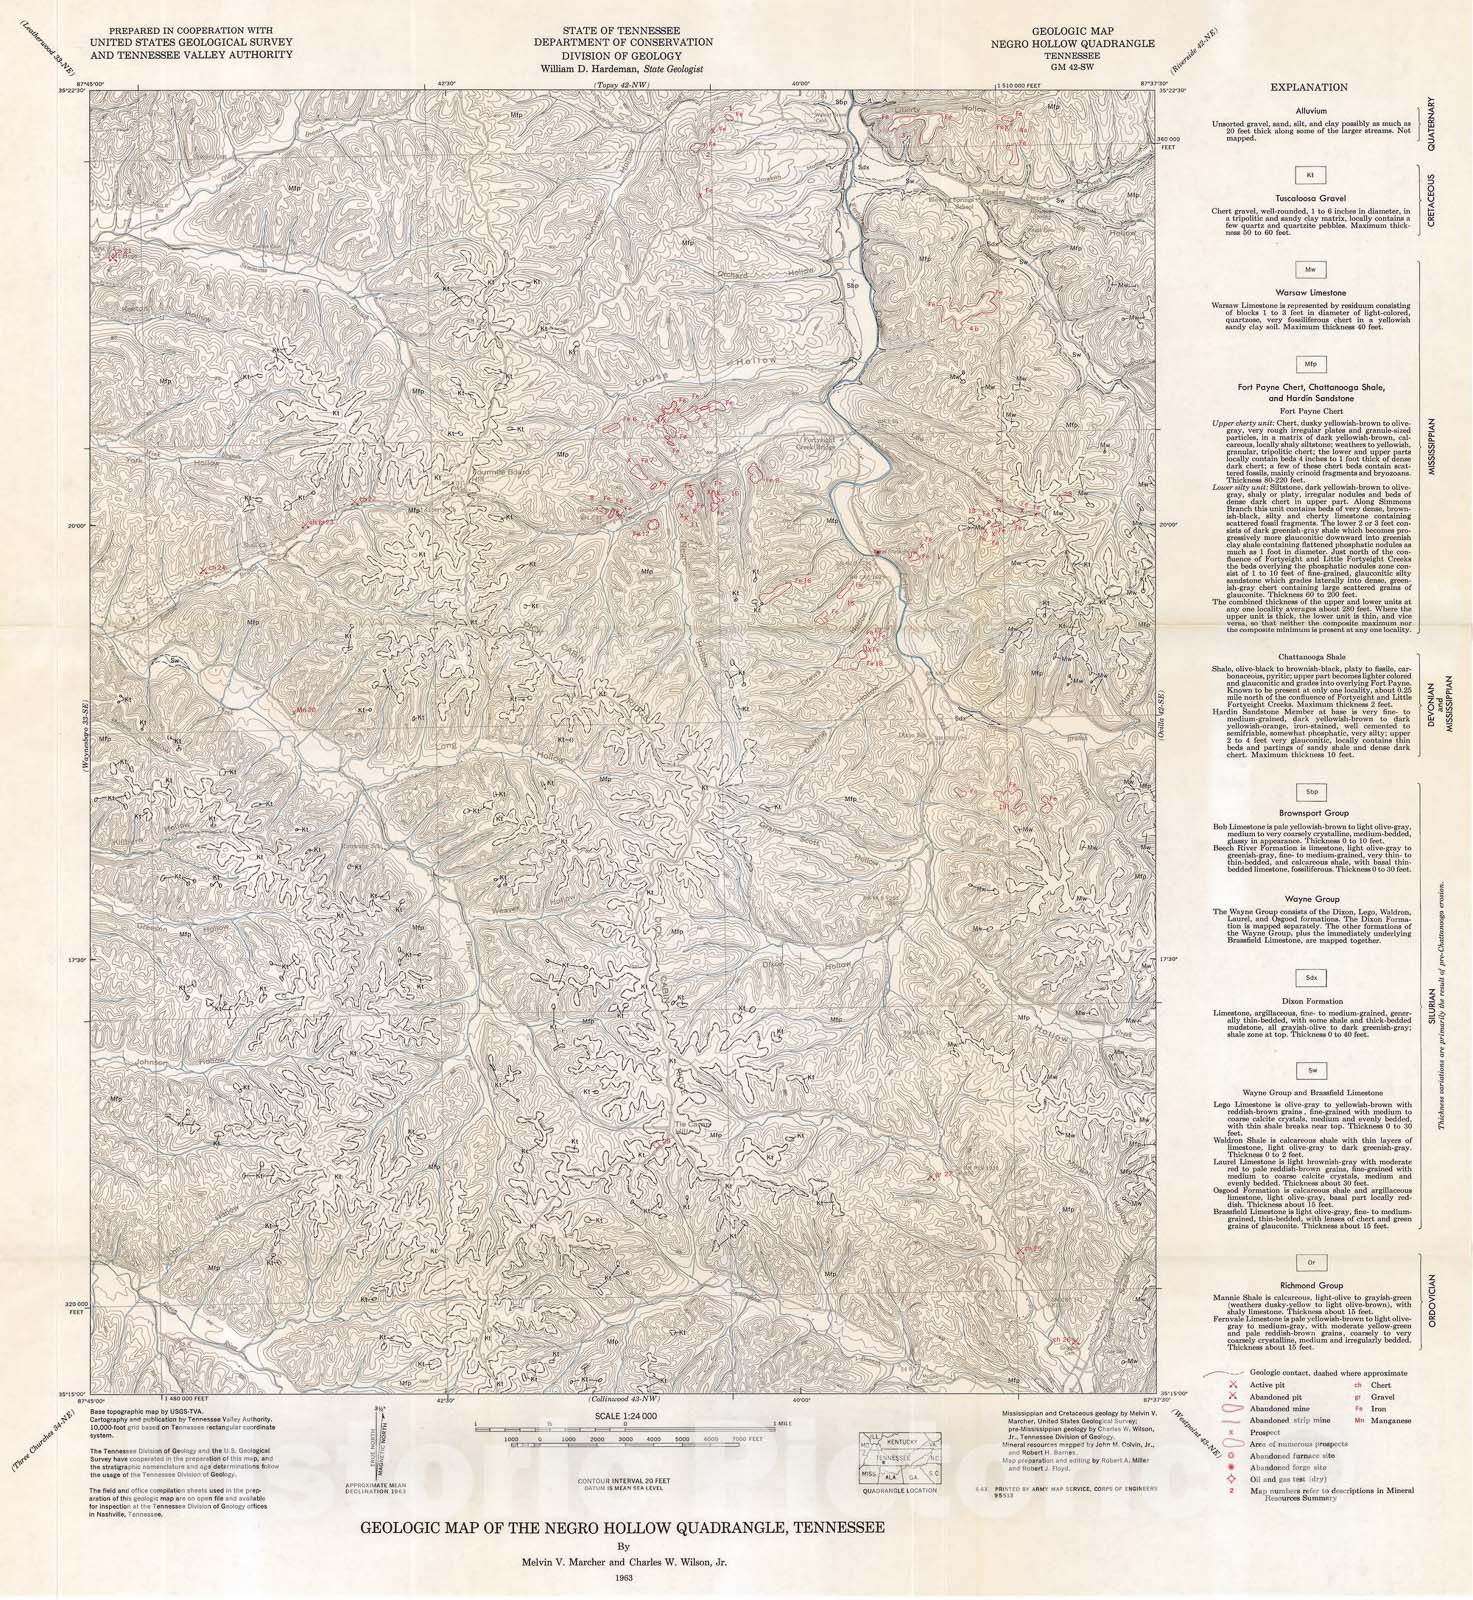 Map : Geologic Map and Mineral Resources Summary of the Negro Hollow Quadrangle, Tennessee (renamed Waynesboro East), 1963 Cartography Wall Art :